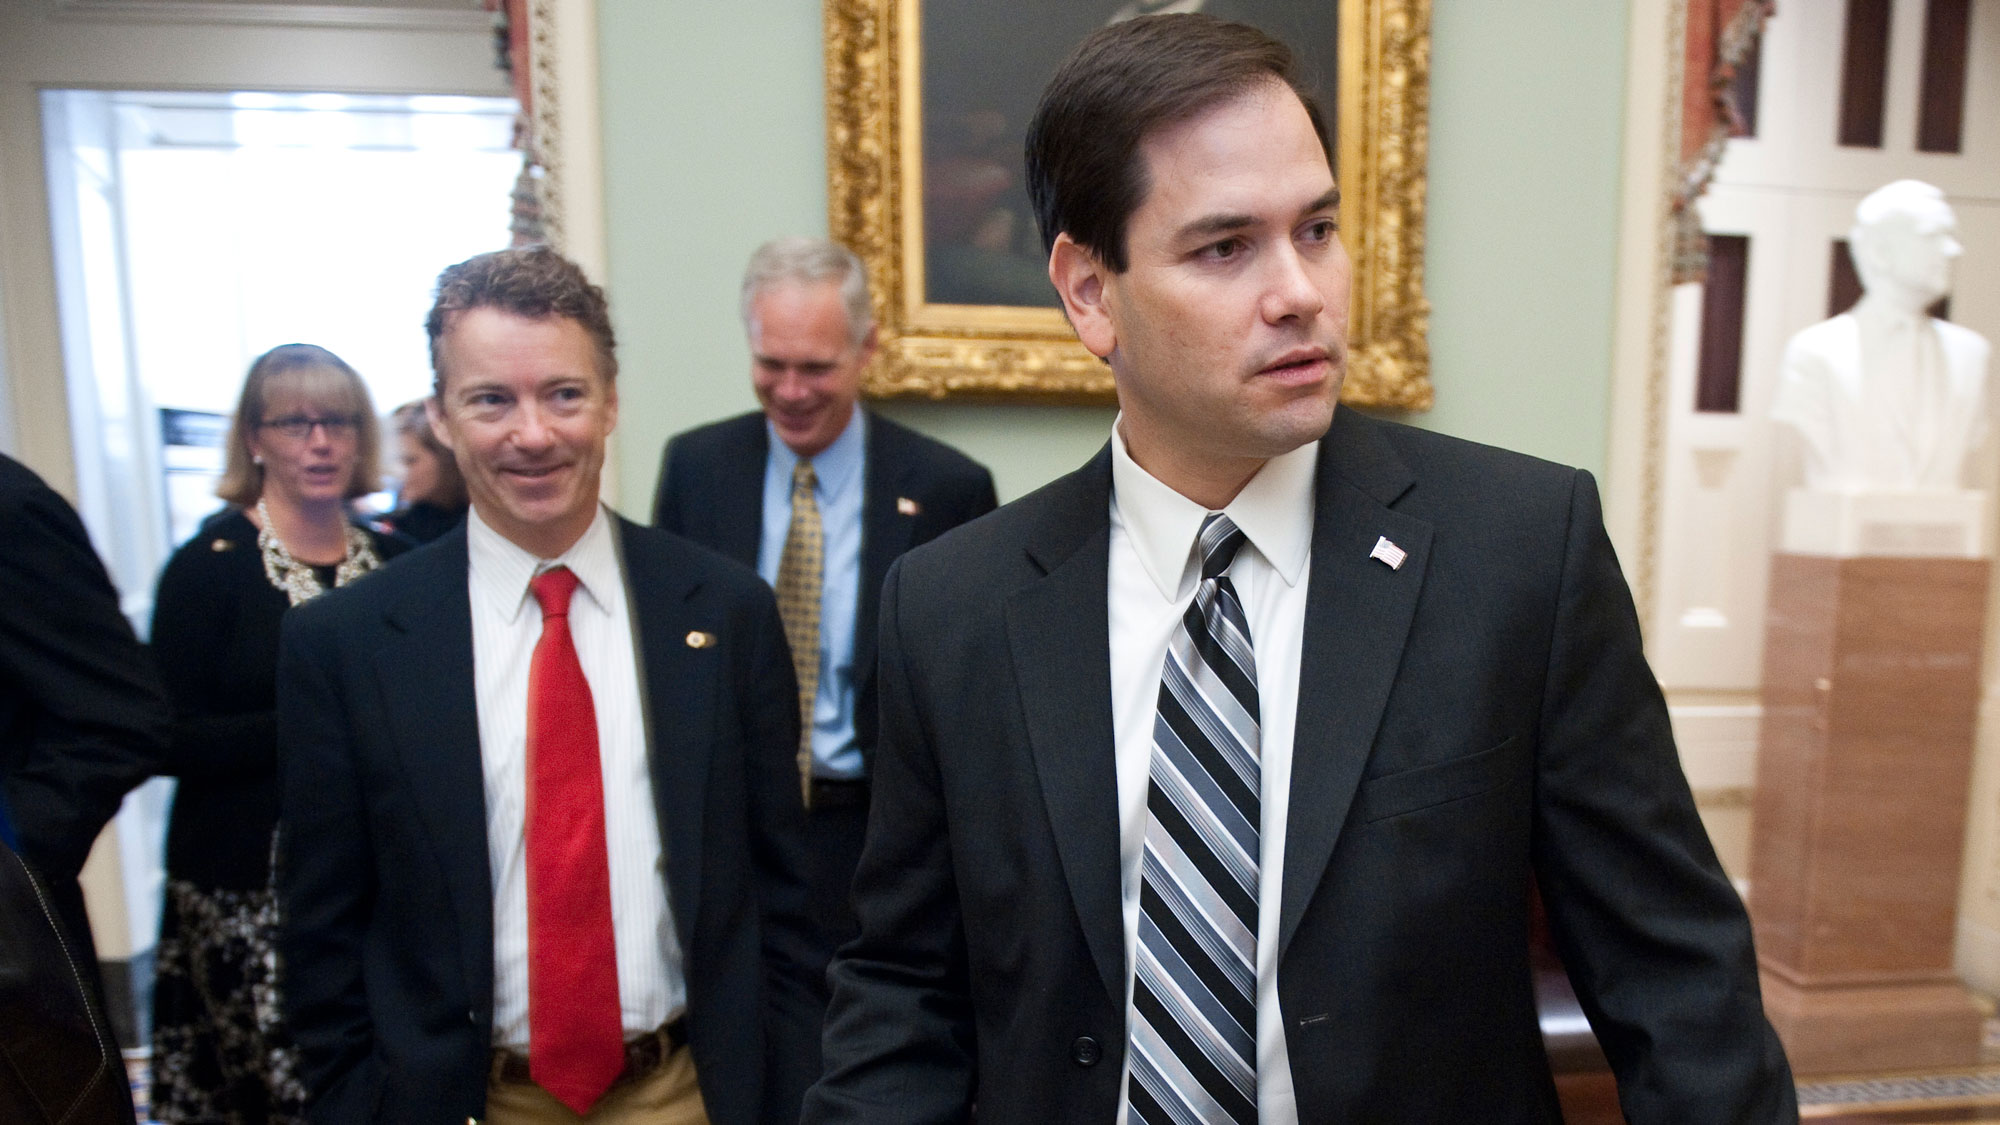 Sen.-elect Rand Paul, R-Ky., and Sen.-elect Marco Rubio, R-Fla., leave the Mansfield Room during a break in freshman orientation on Wednesday, Nov. 17, 2010.
